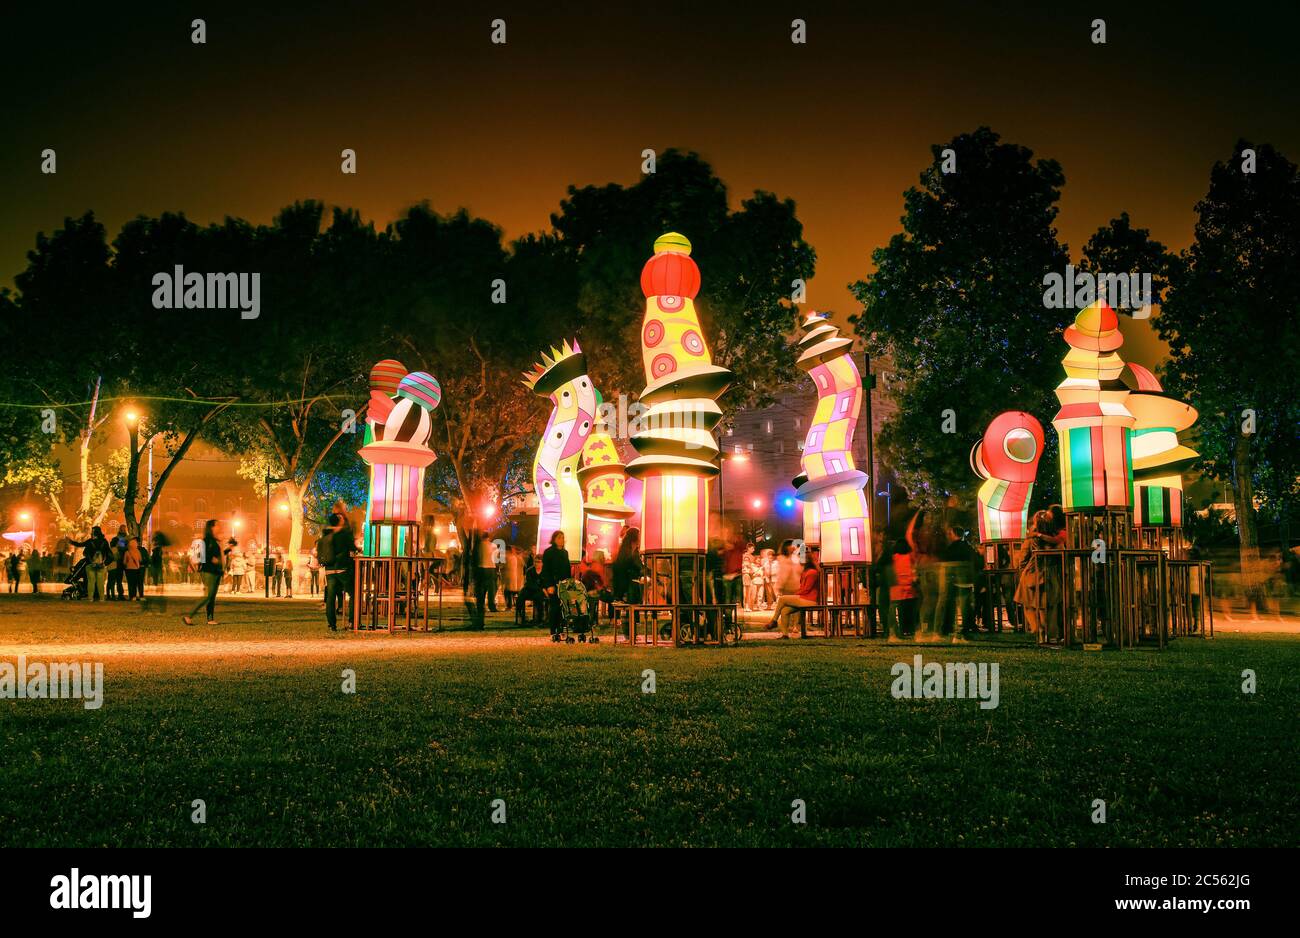 Aveiro, Portugal - July 19, 2019: Installation Billevesées l'estaminet, by Picto facto, during the Festival dos Canais in Aveiro, Portugal. Stock Photo